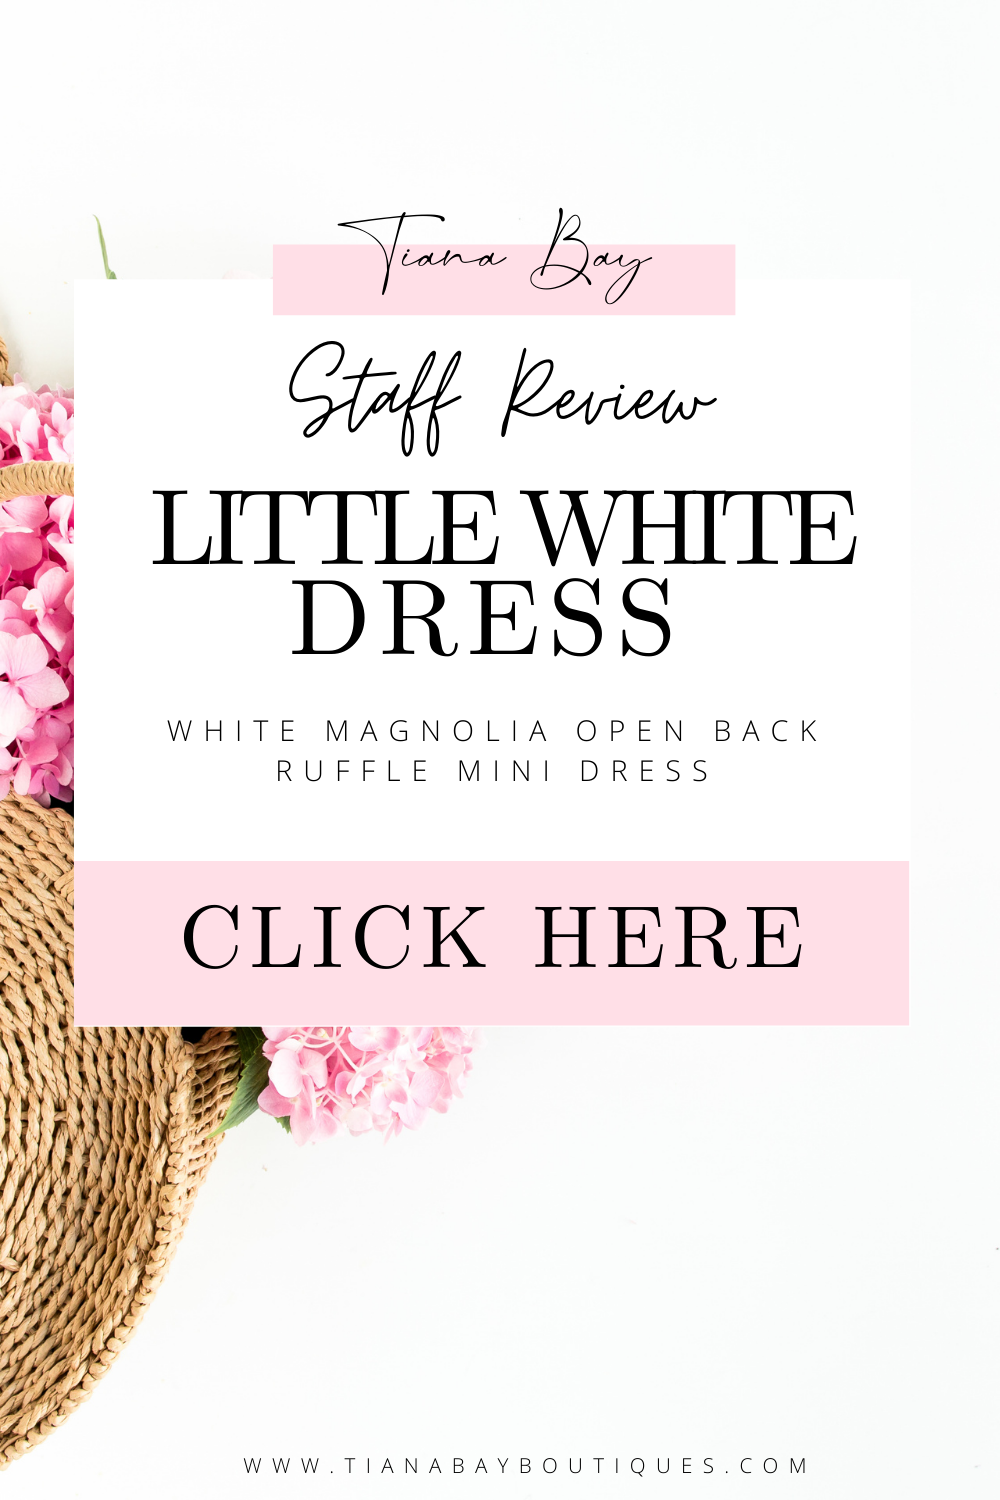 Our Review on the Little White Dress